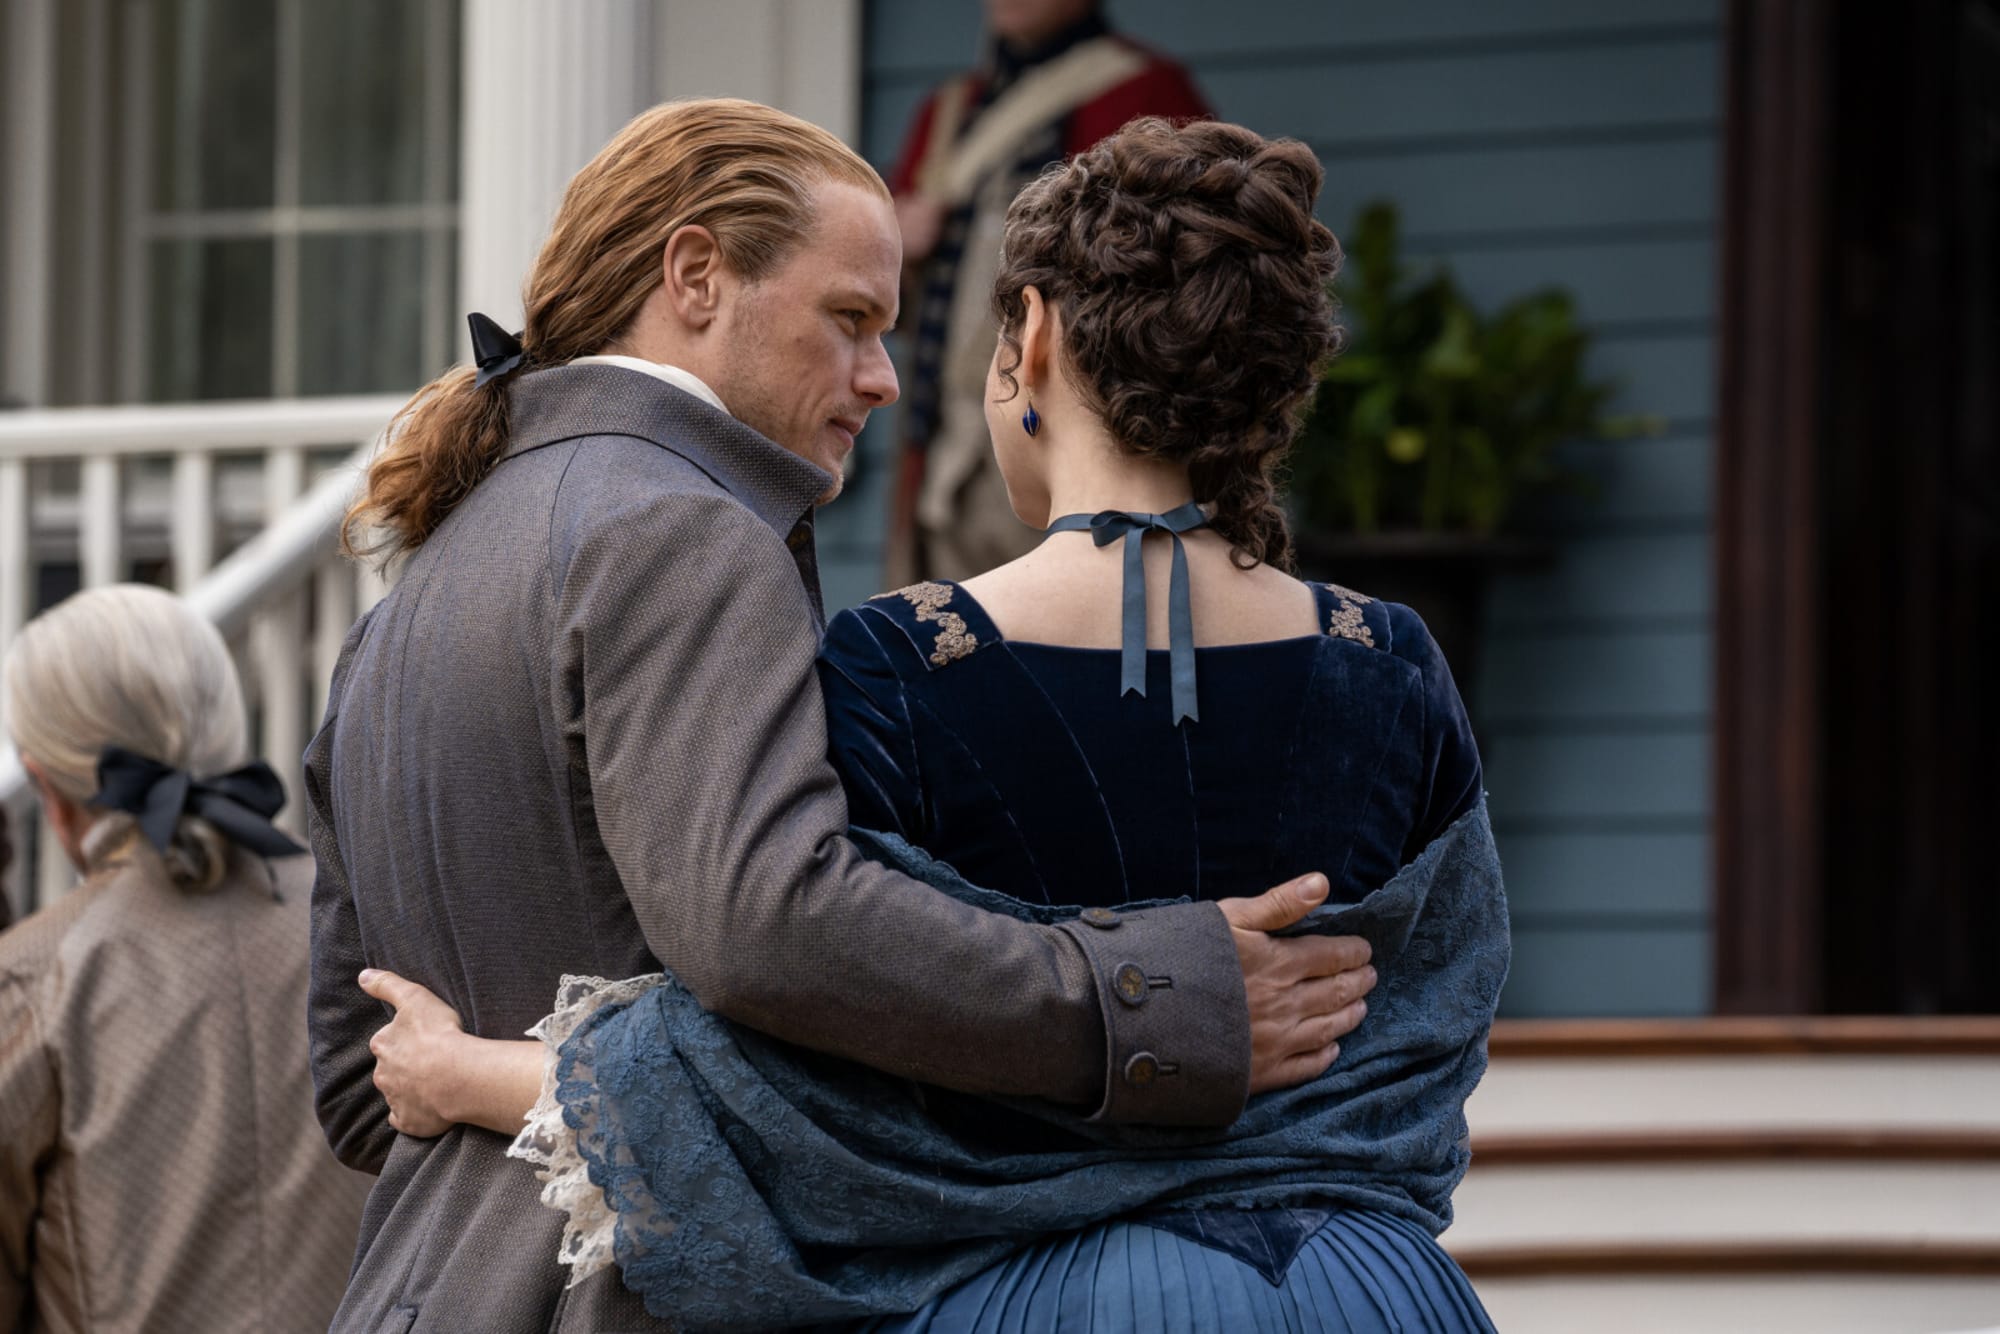 Outlander Season 6 is not coming to Netflix US in June 2022